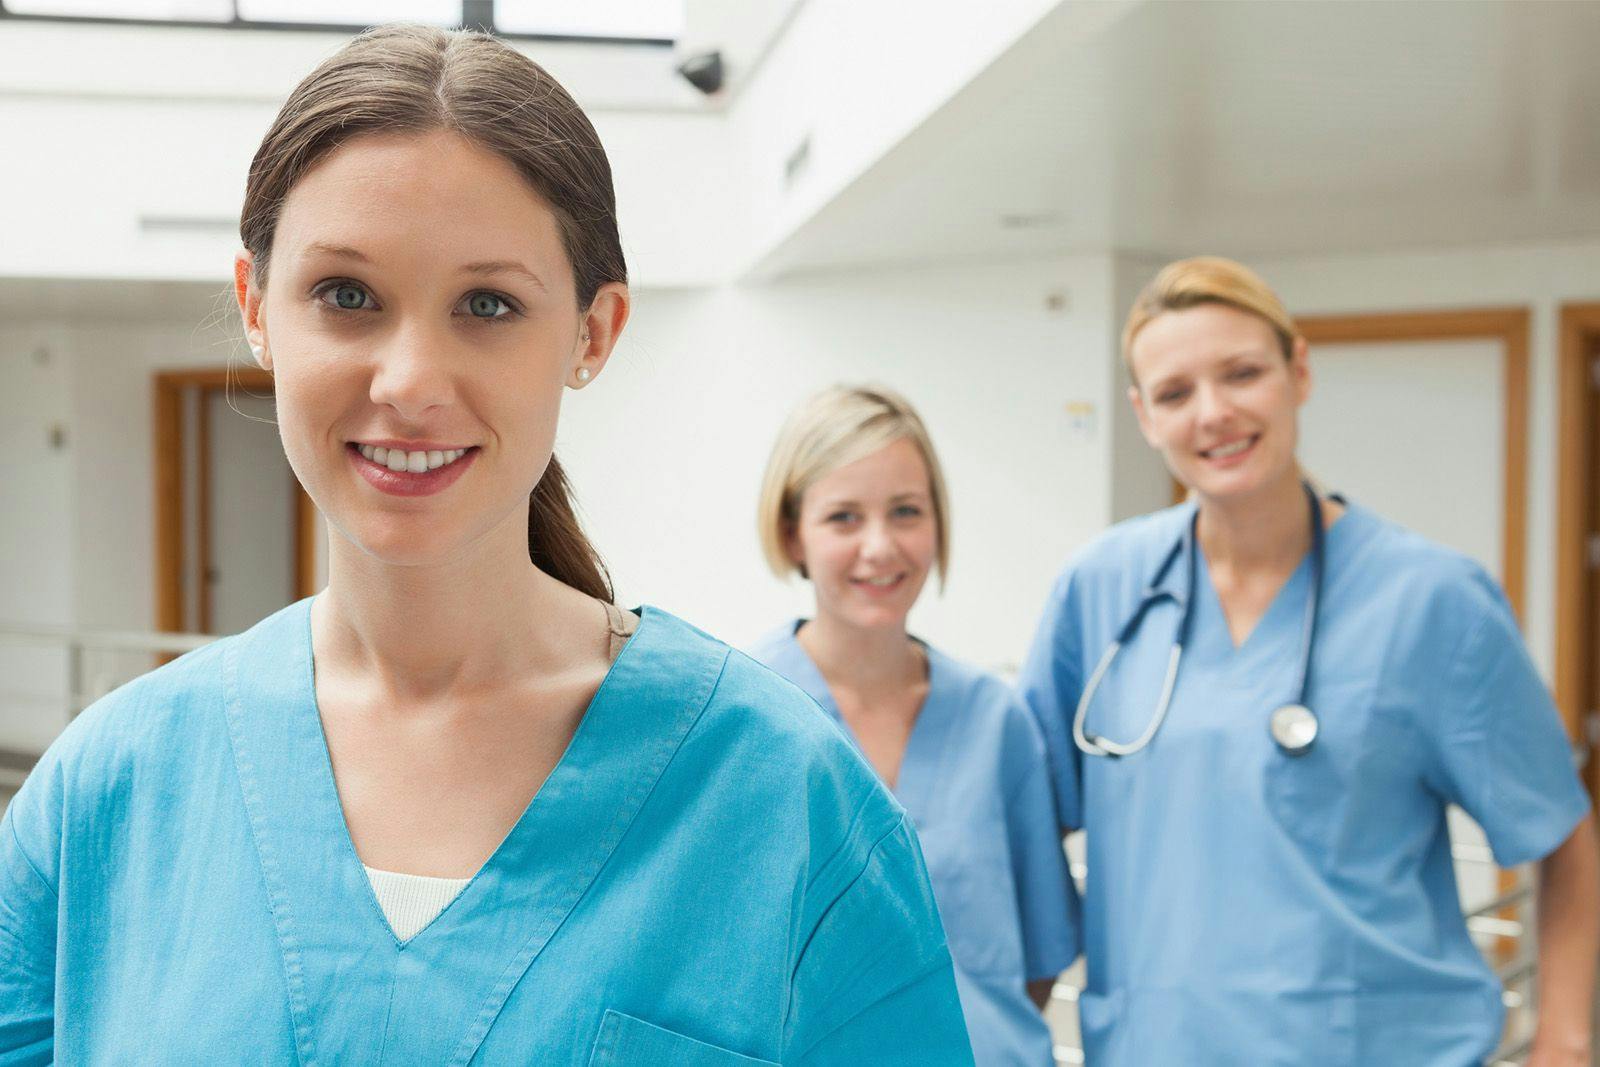 Medical Assistant vs Registered Nurse: What are the Differences?